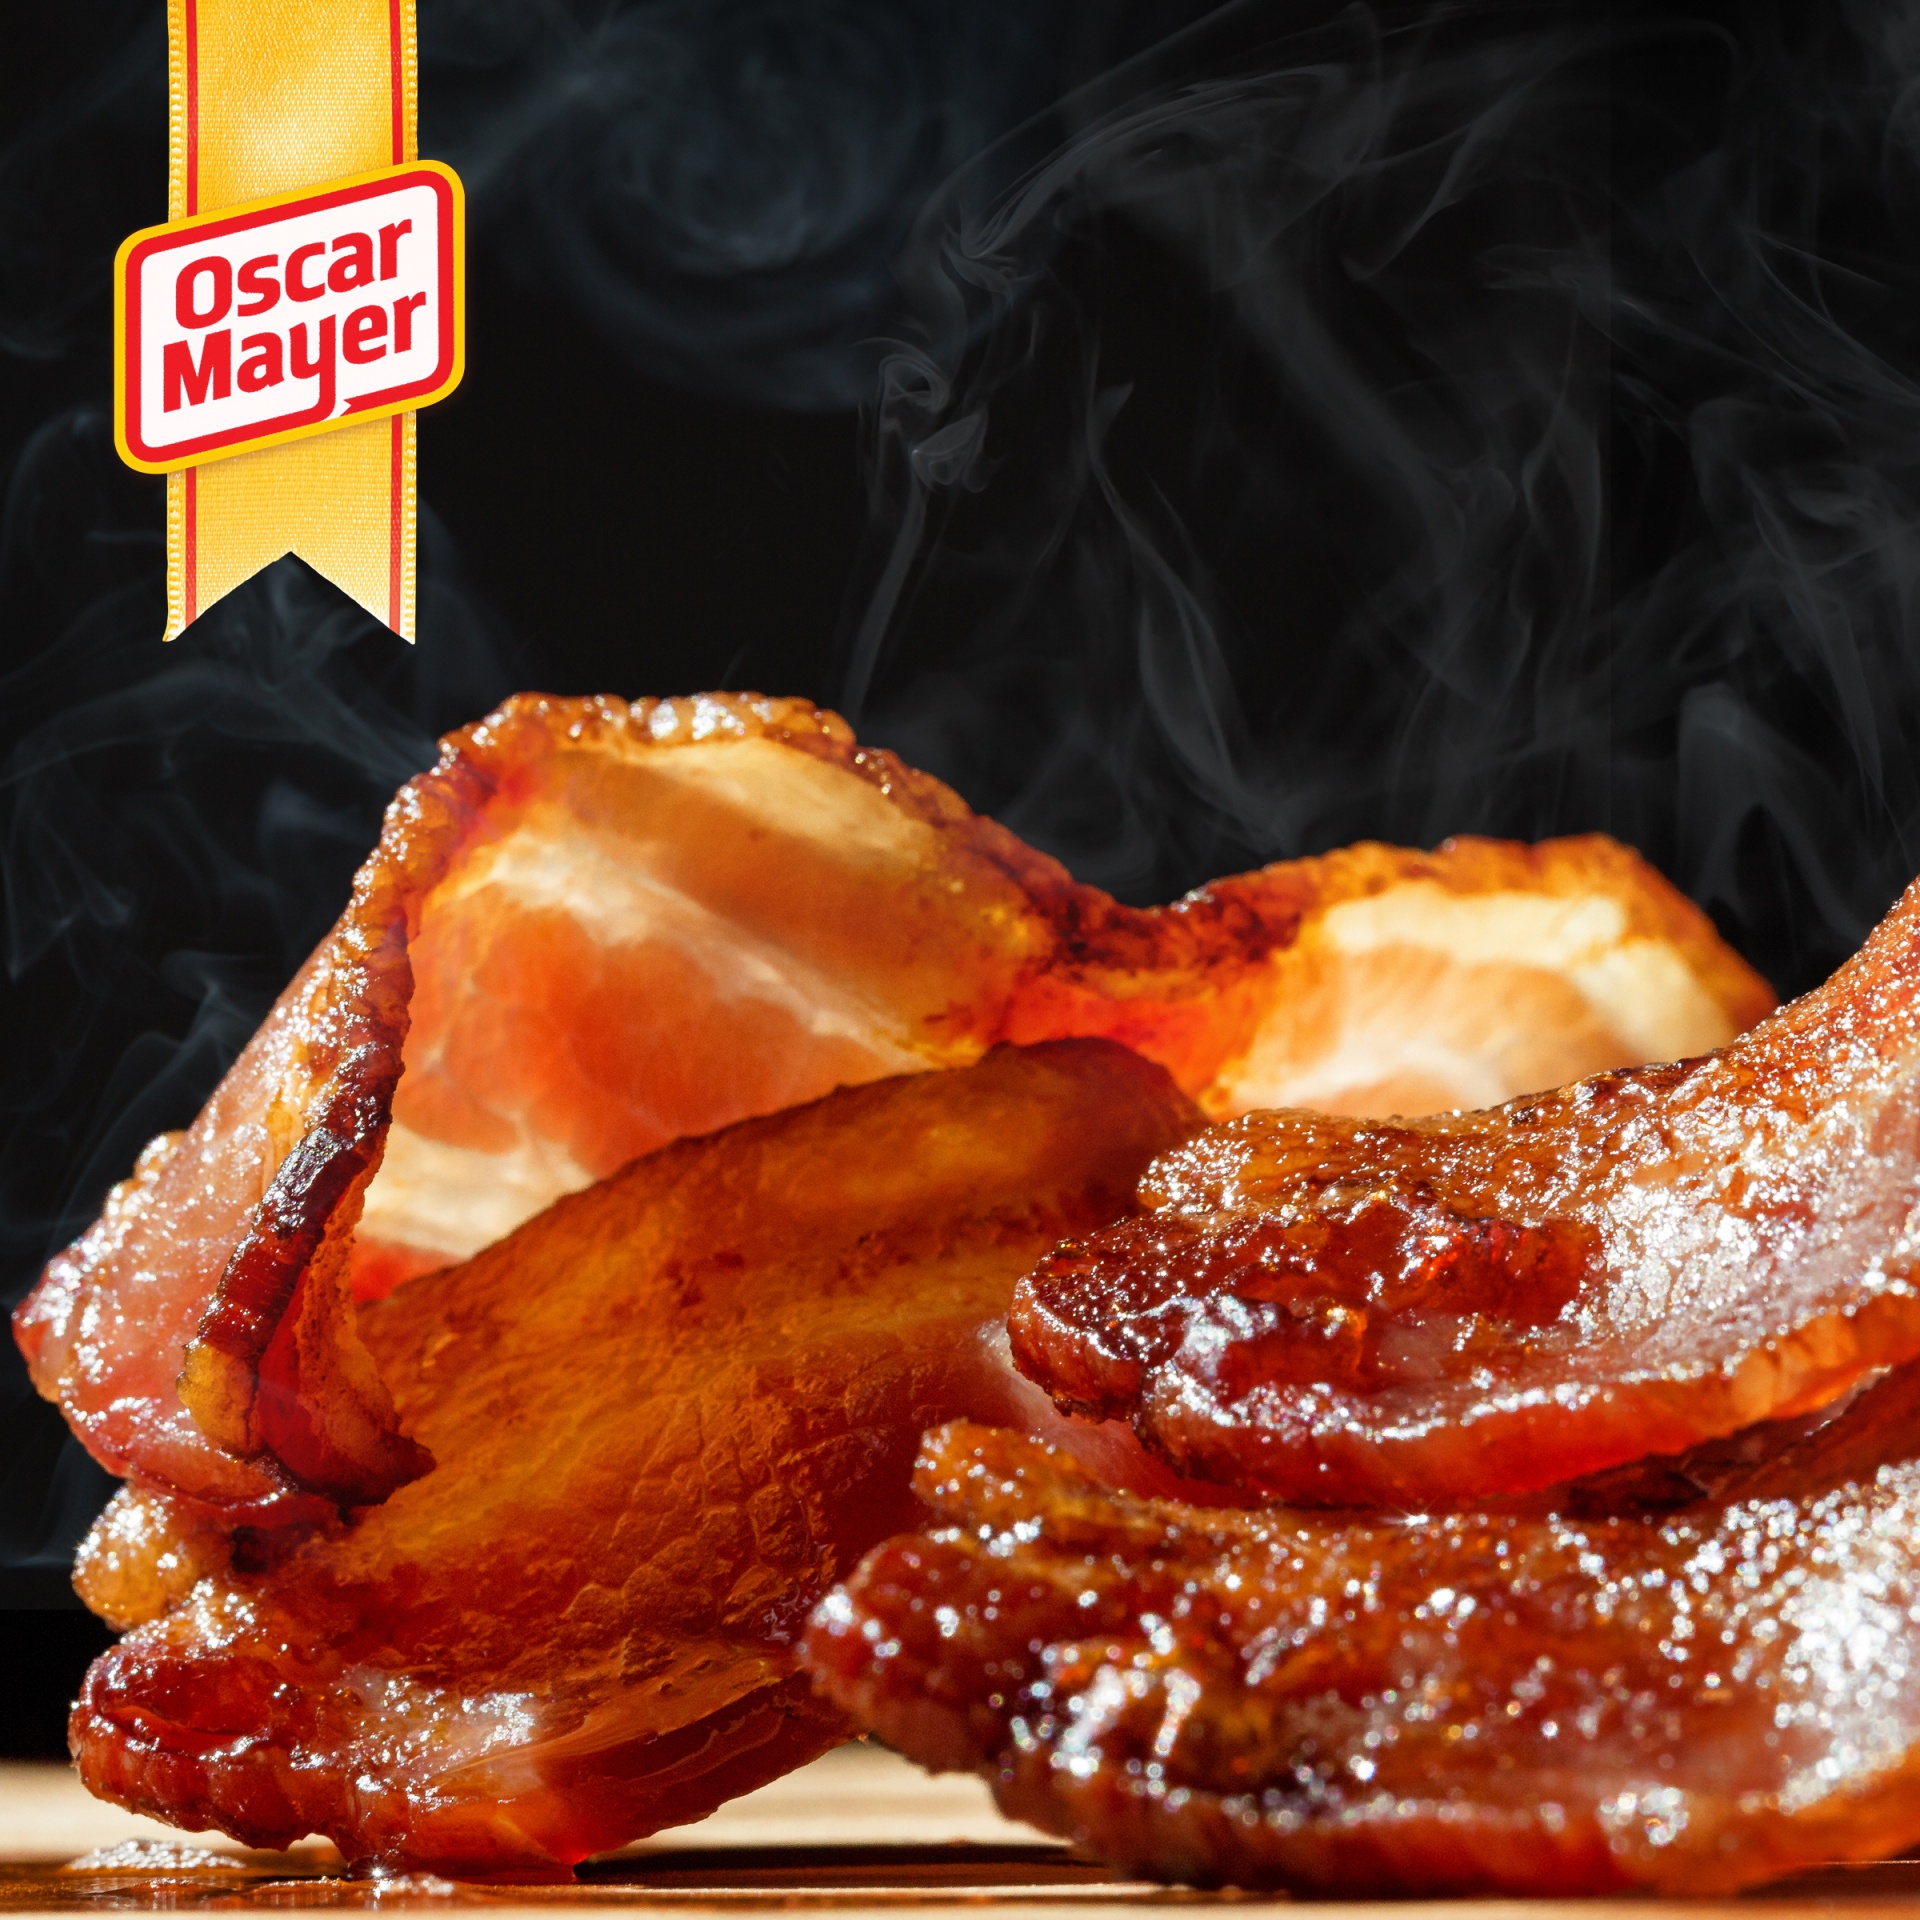 slide 2 of 7, Oscar Mayer Naturally Hardwood Smoked Thick Cut Bacon Mega Pack Pack, 15-17 Slices, 22 oz